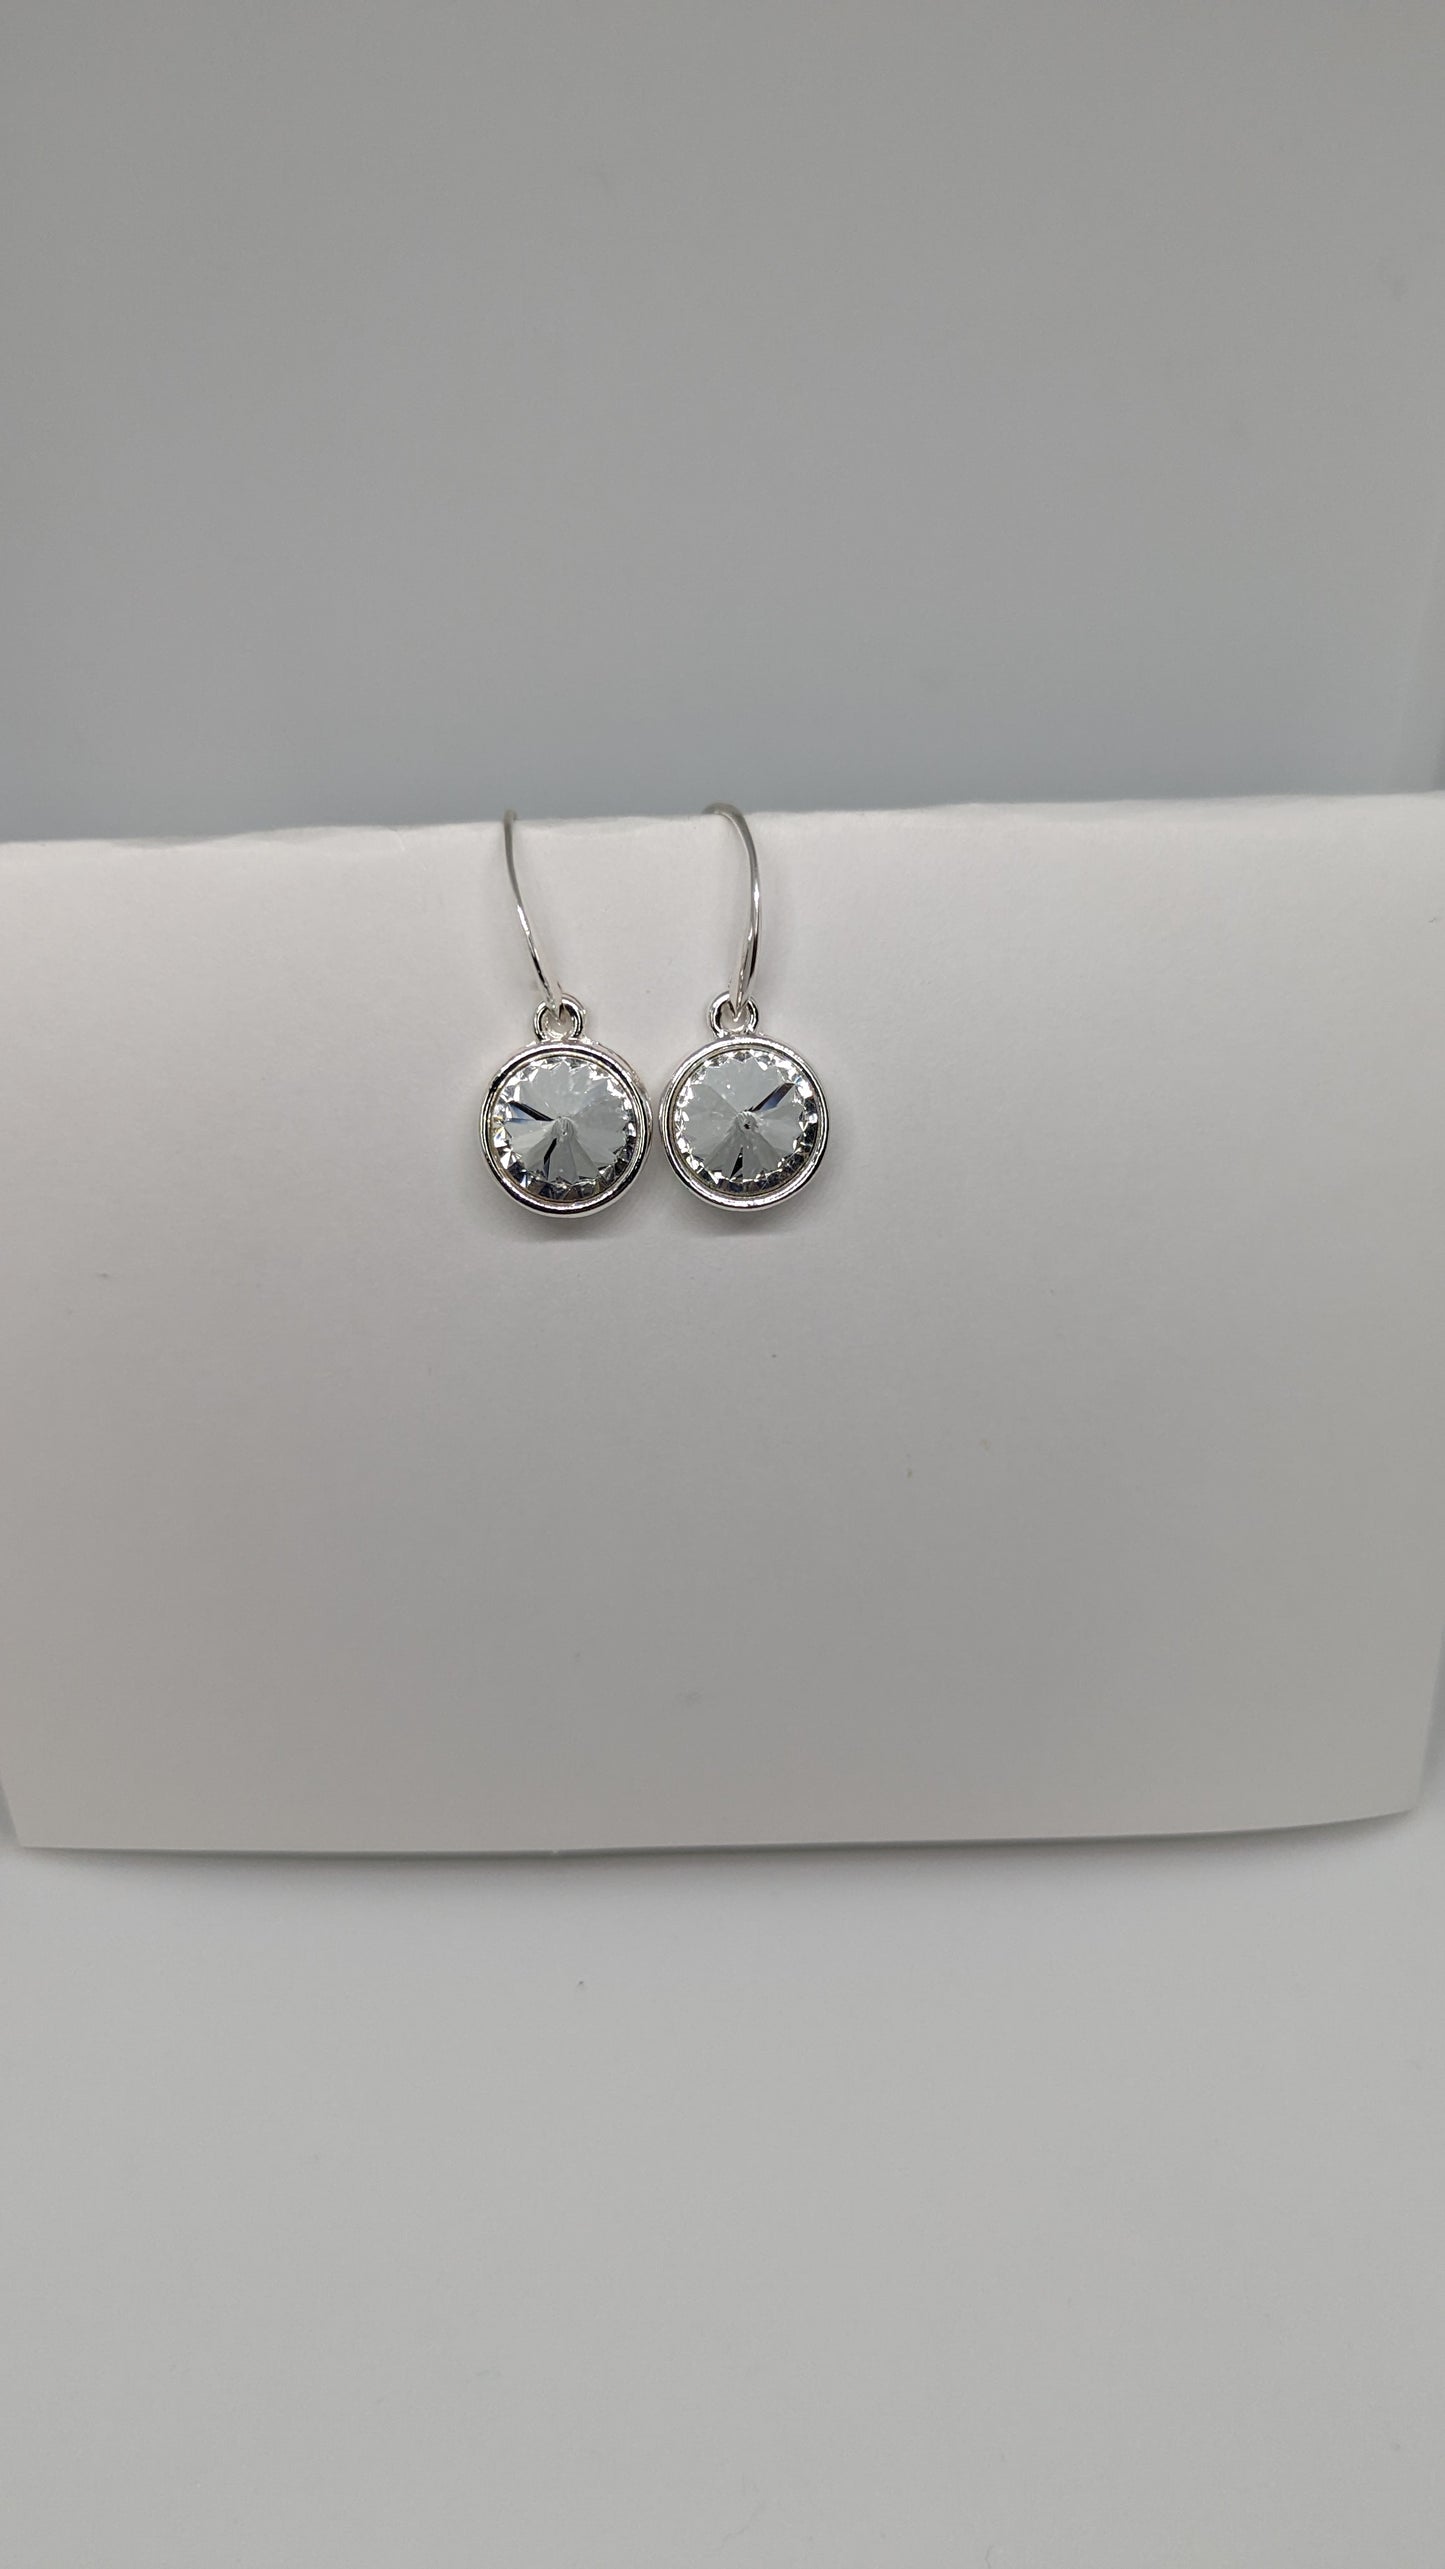 sparkly earrings, rivoli earrings, circle jewellery, sparkly jewellery, gift for her, girlfriend gift